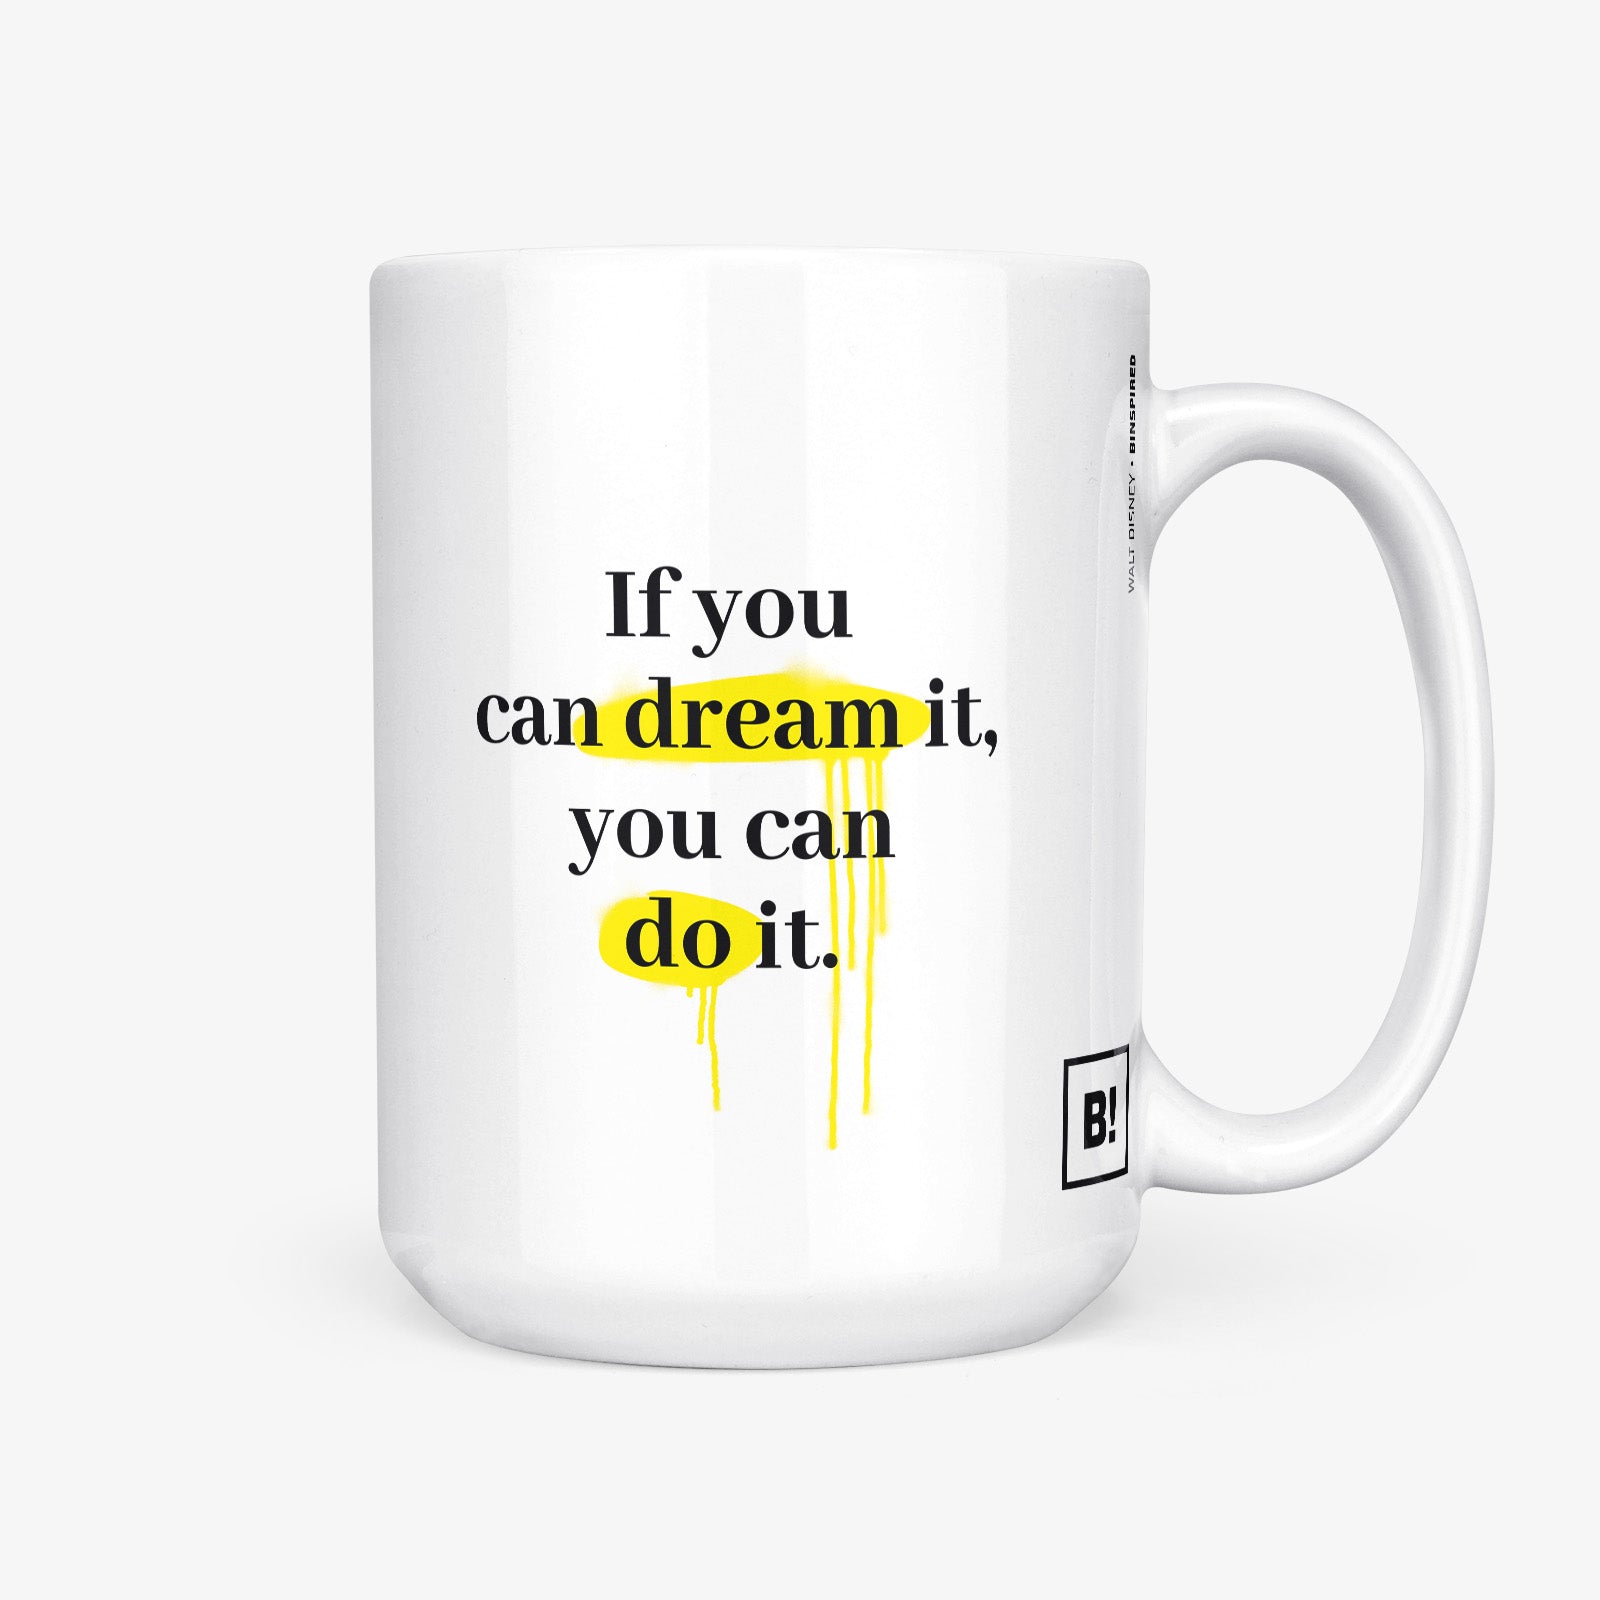 Be inspired by Walt Disney's famous quote, "If you can dream it, you can do it" on this white and glossy 15oz coffee mug with the handle on the right.